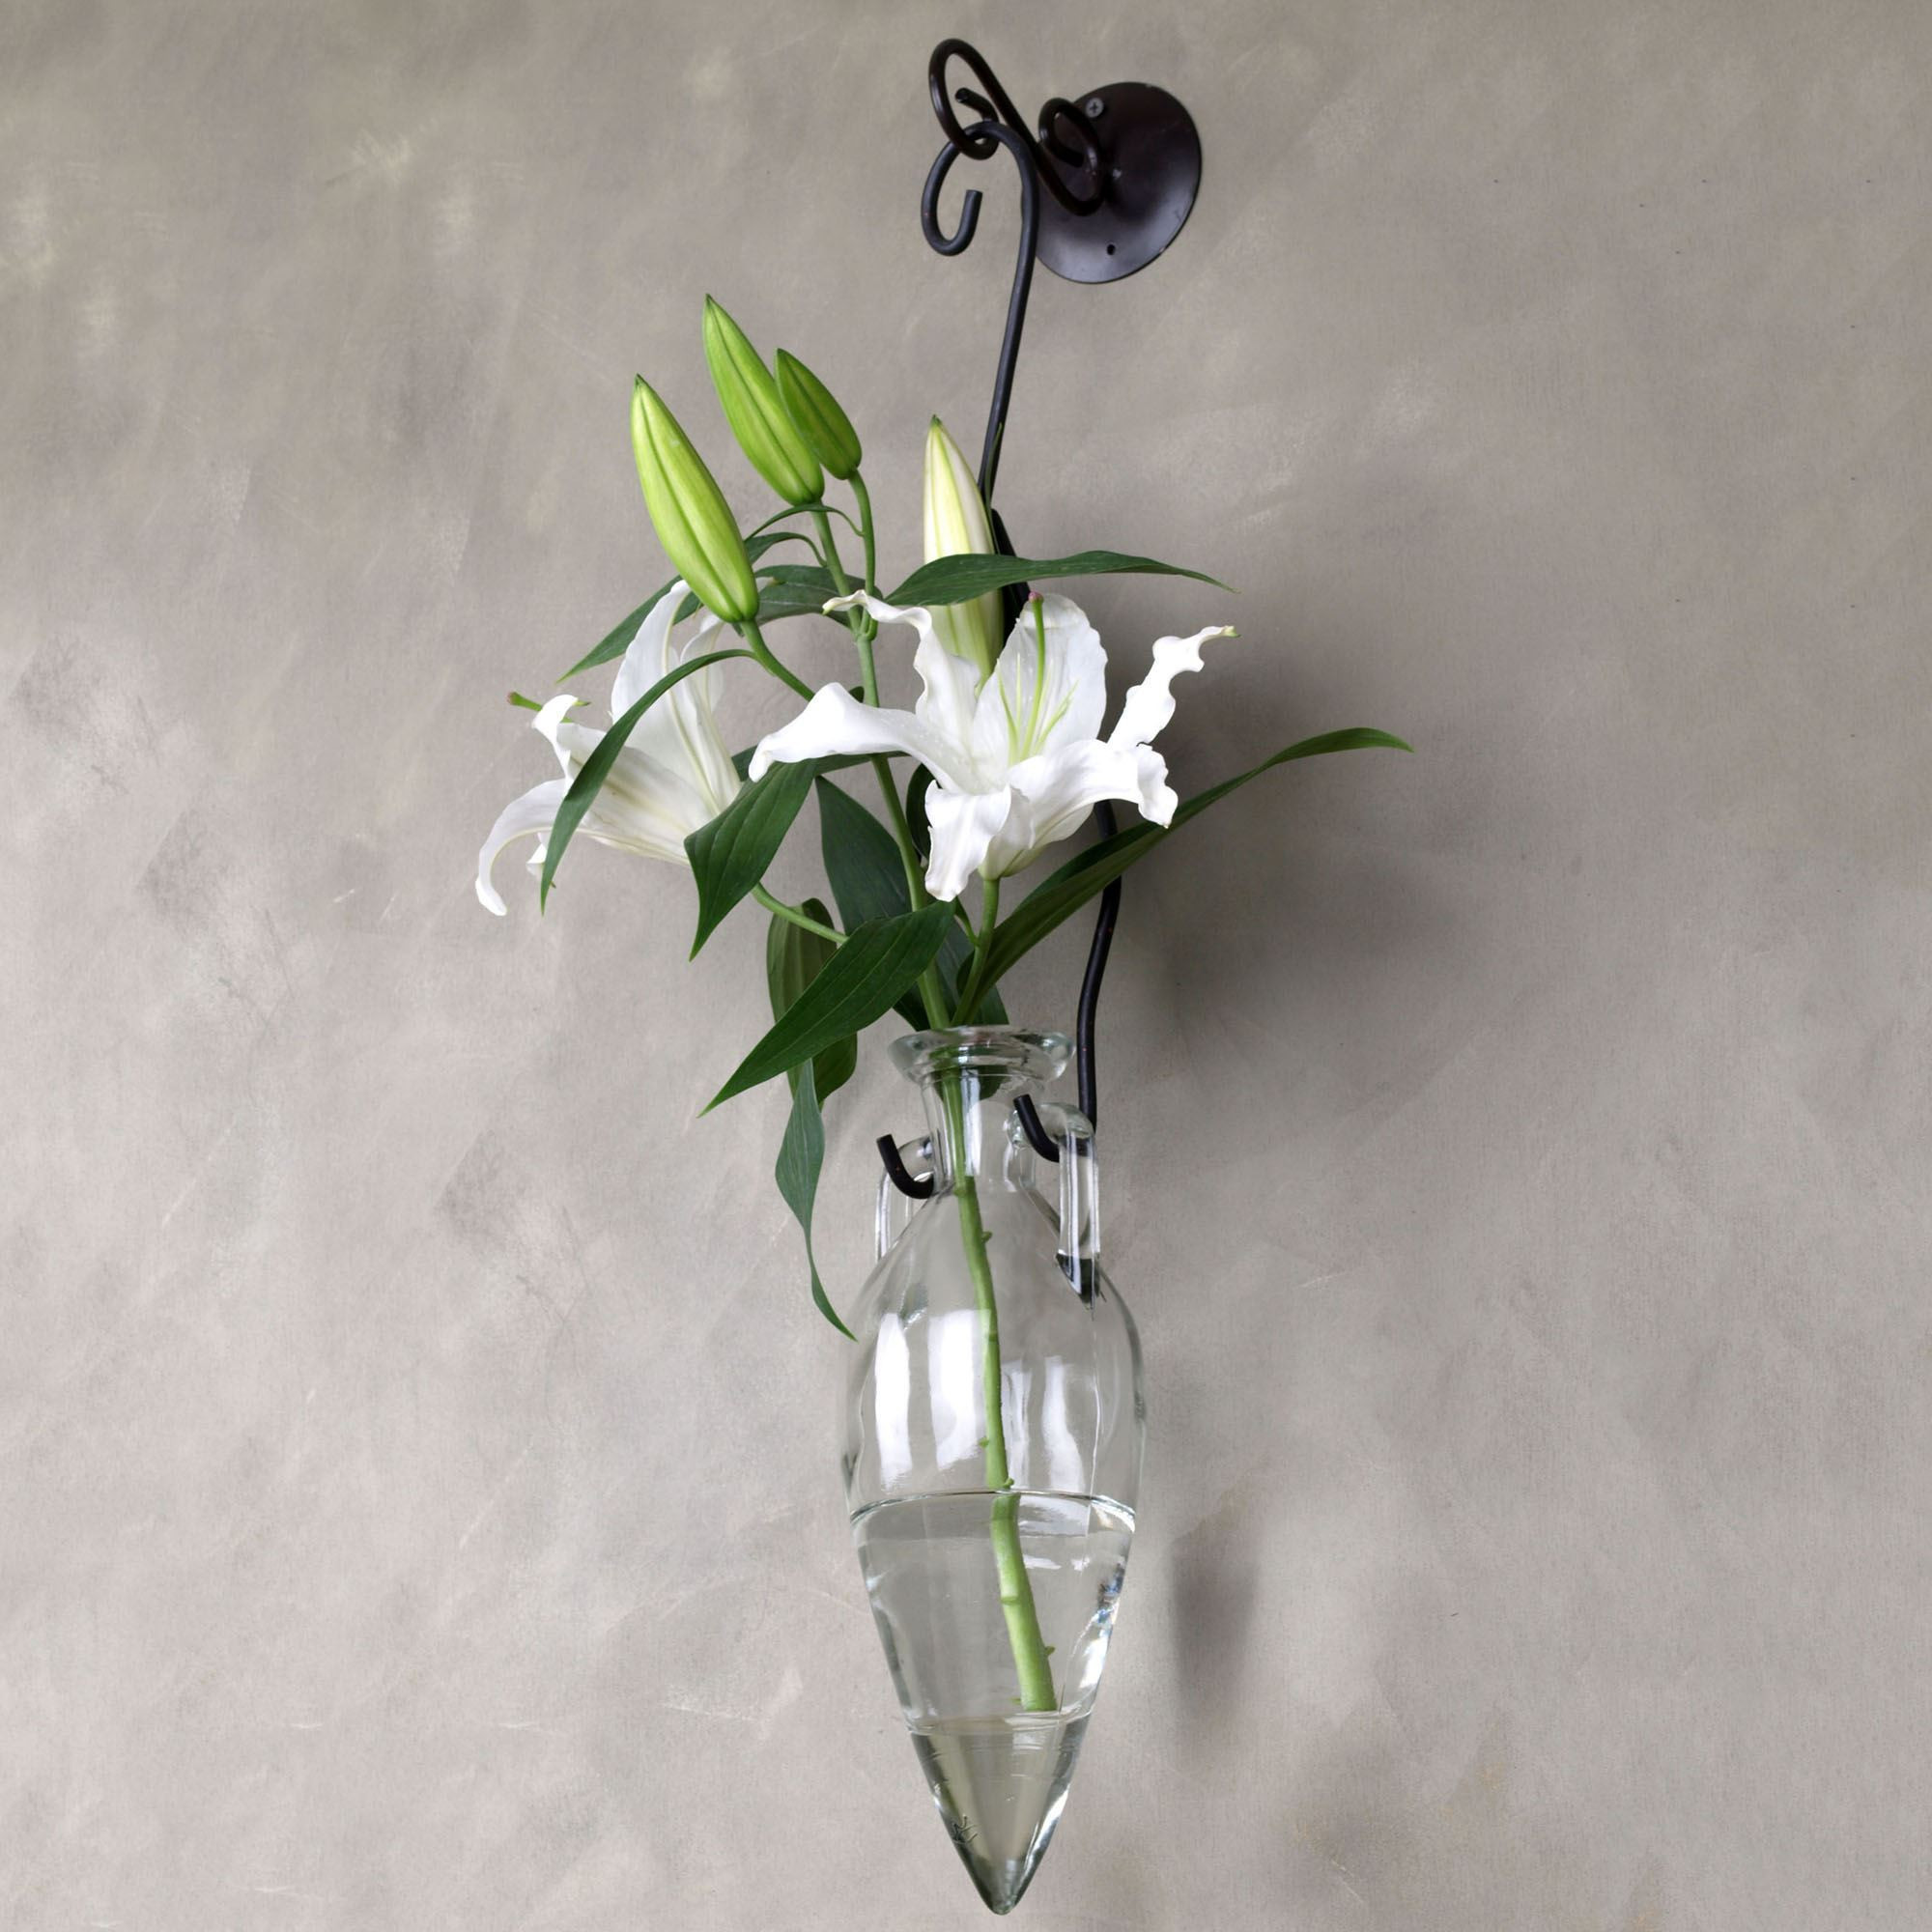 29 Fabulous Diy Glass Vase Ideas 2024 free download diy glass vase ideas of wall decor flowers great h vases wall hanging flower vase newspaper with wall decor flowers great h vases wall hanging flower vase newspaper i 0d scheme wall scheme